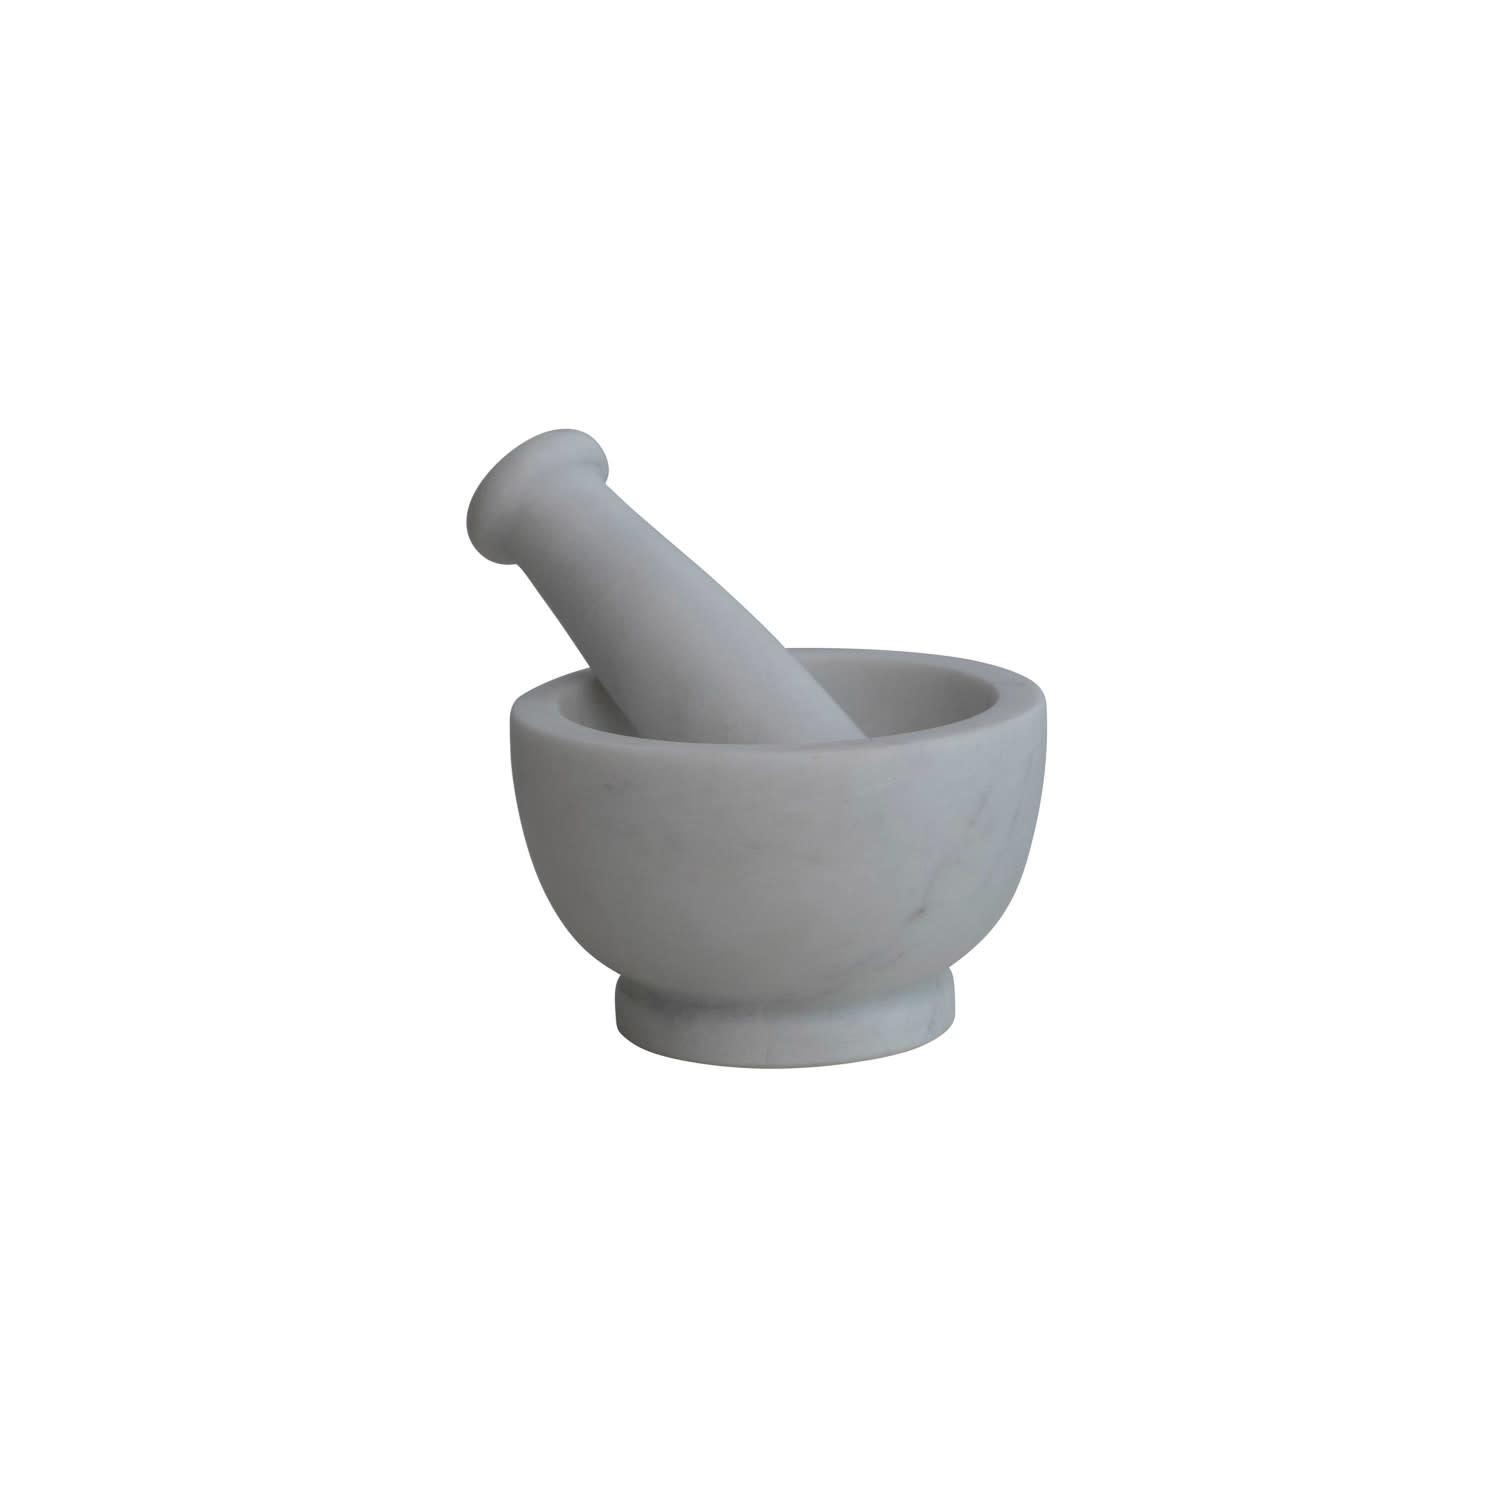 Marble Mortar & Pestle, White, Available for local pick up